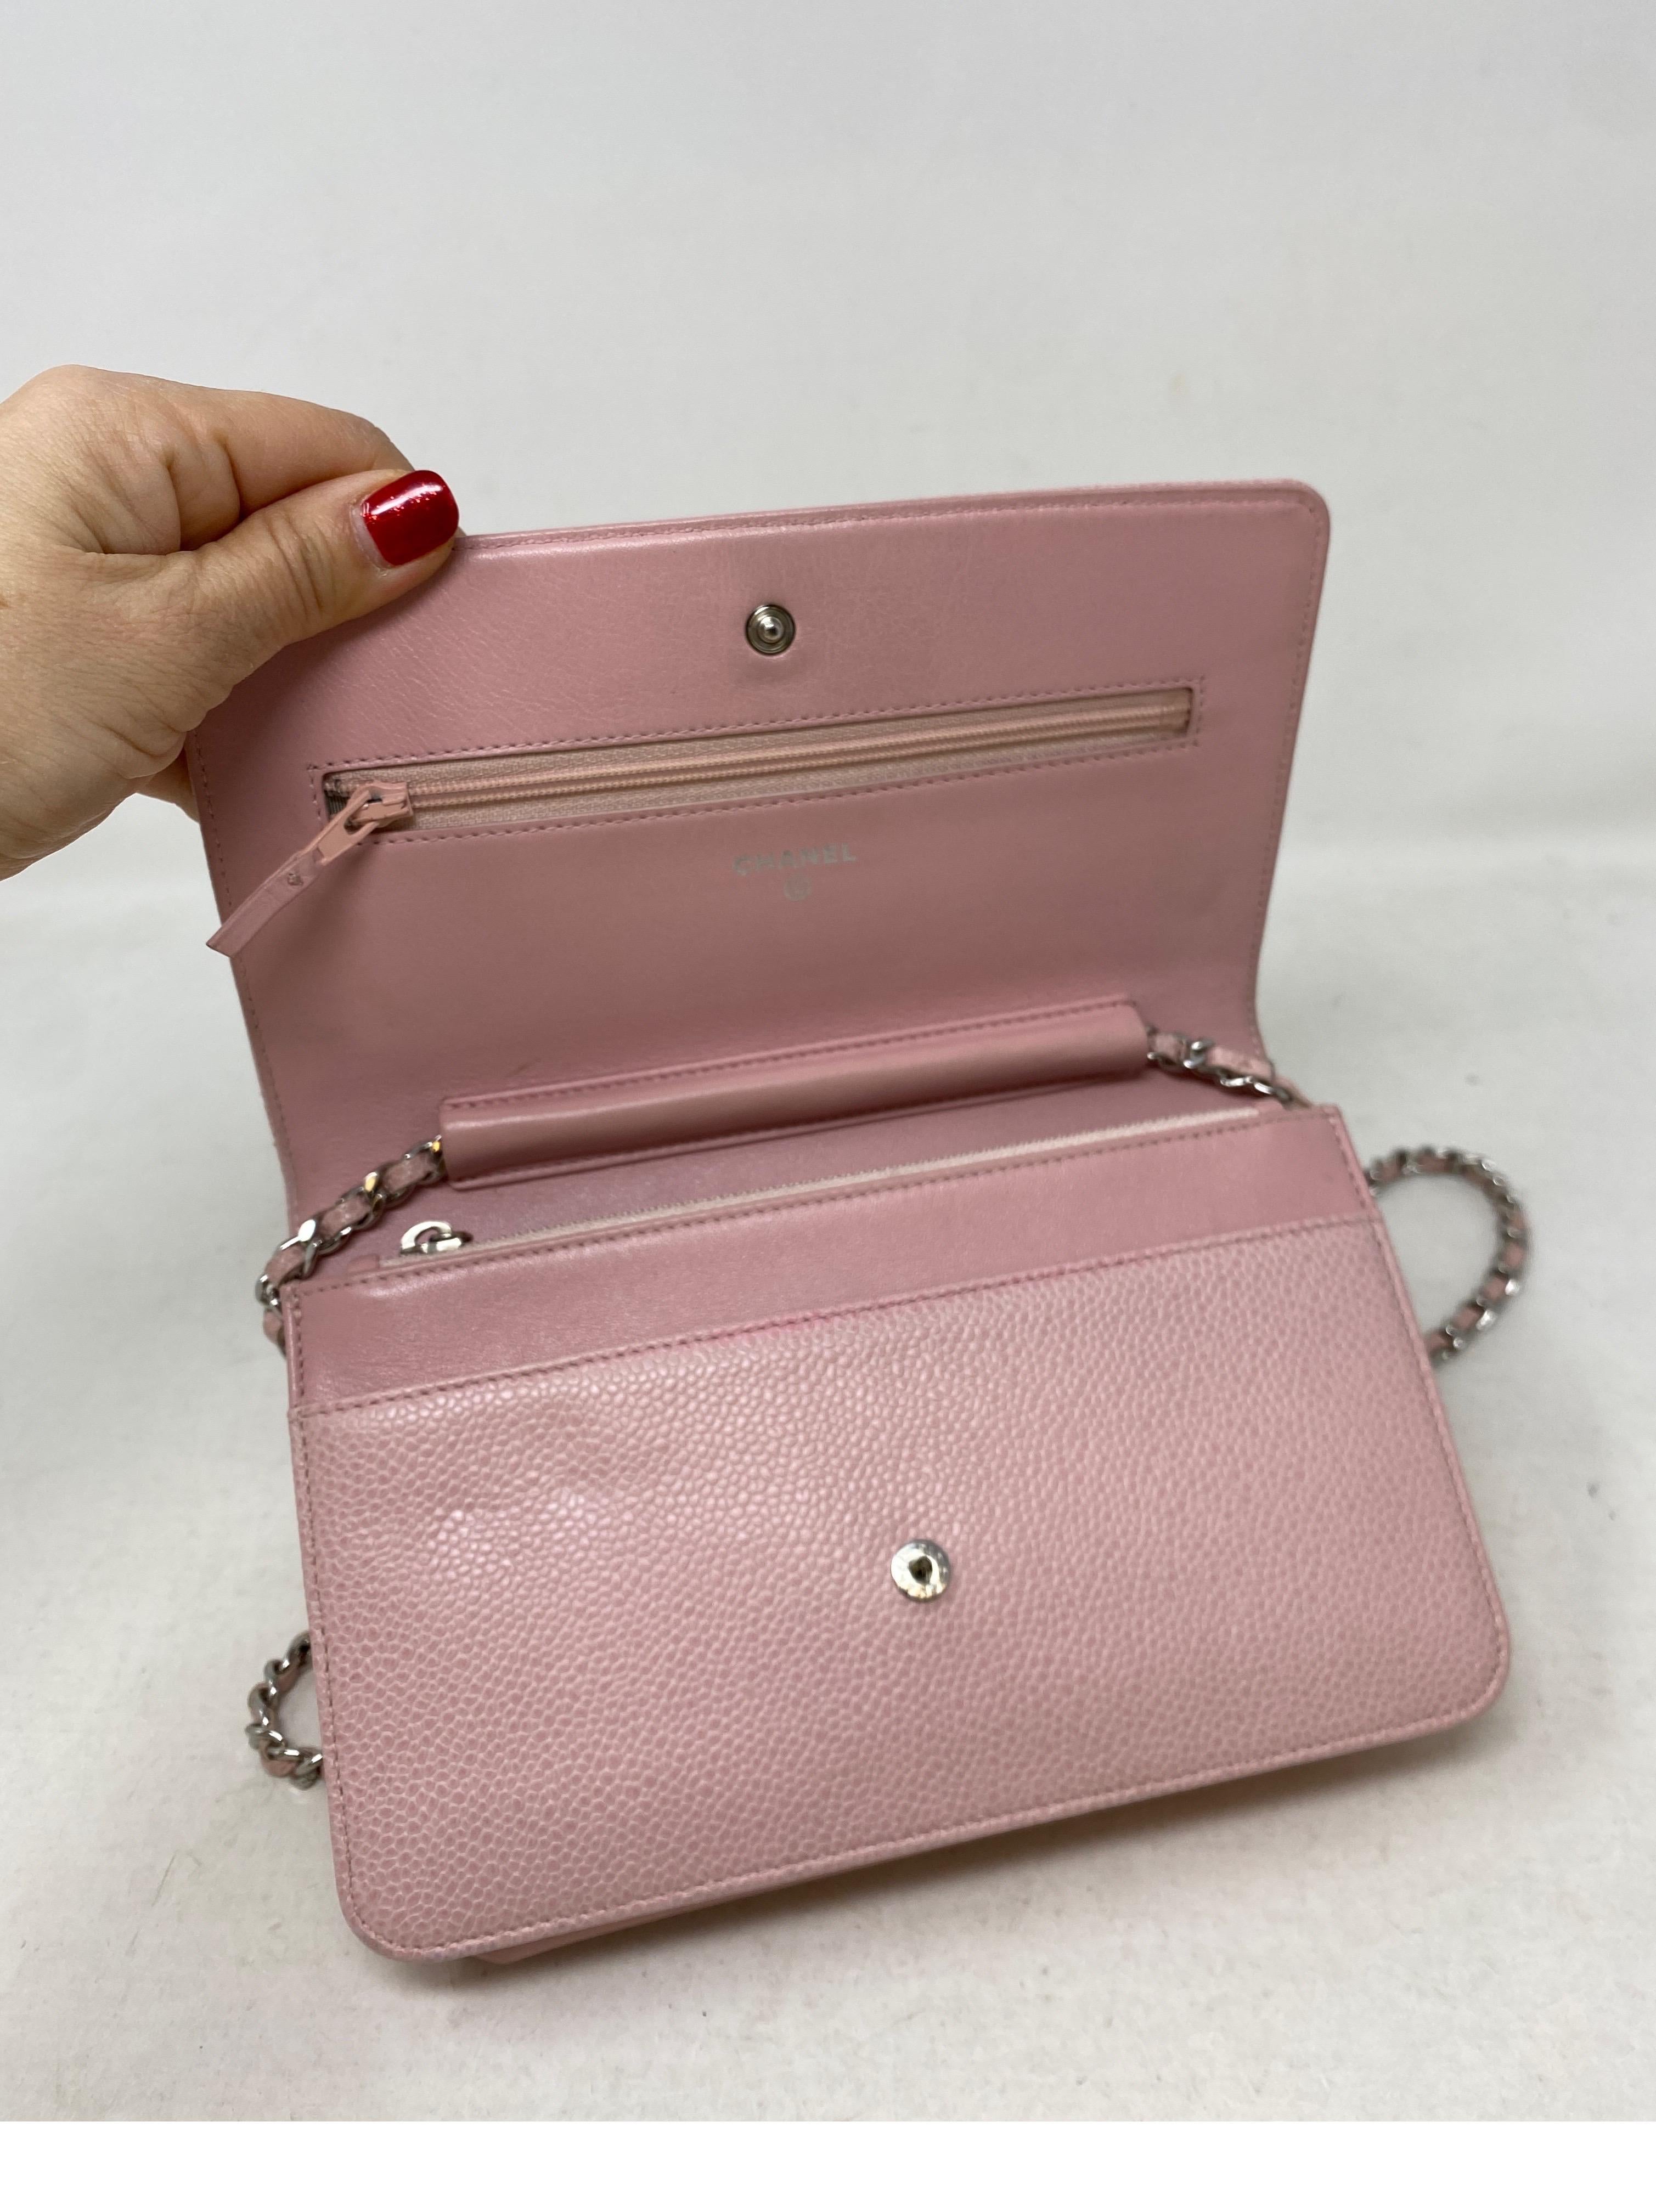 Chanel Light Pink Wallet On A Chain Bag  8